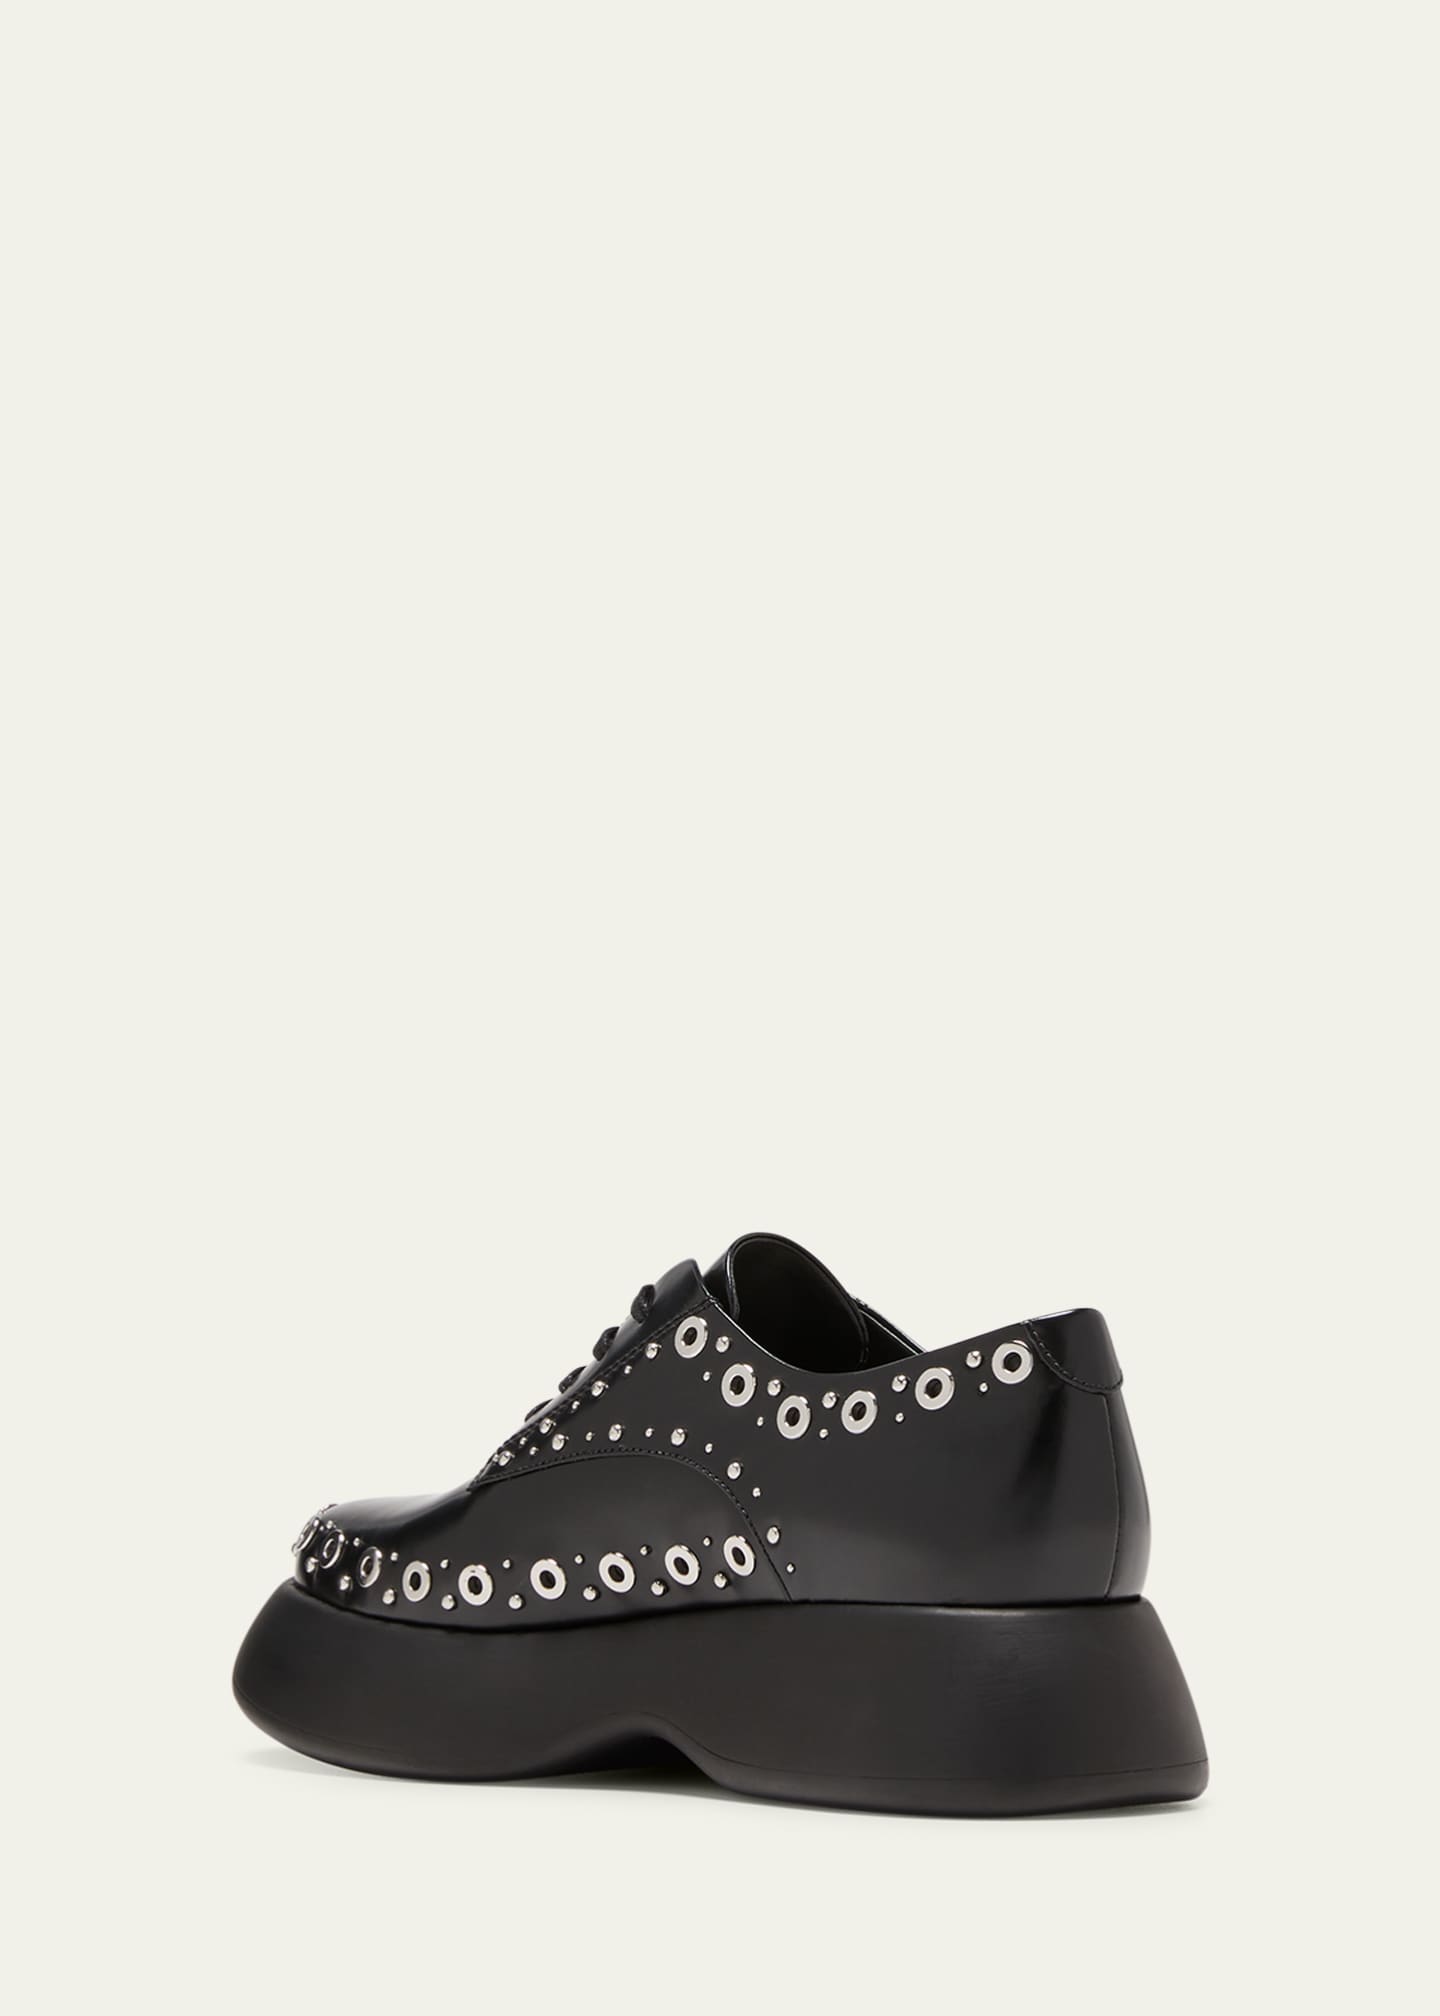 3.1 Phillip Lim Mercer Grommet Leather Lace-Up Loafers - Bergdorf Goodman